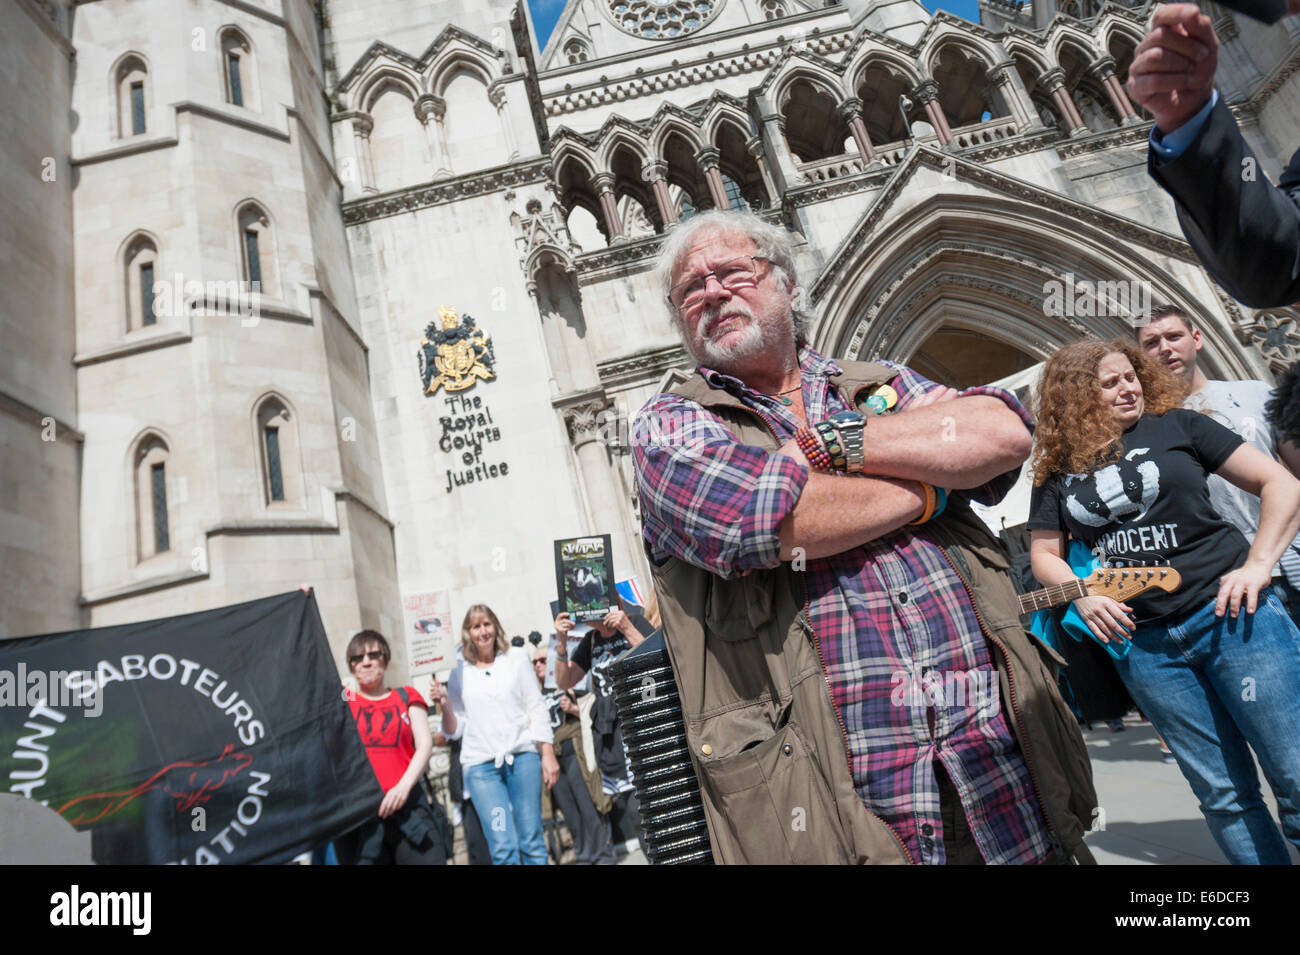 Royal Courts of Justice, London, UK. 21st August 2014. A large crowd of anti badger cull protesters gathered outside the Royal Courts of Justice as The Badger Trust was in court with a new legal challenge over the government’s badger cull policy. The organisation wants a High Court ruling stating that there has been an unlawful failure to put in place an independent panel of experts to oversee this year’s planned cull in Gloucestershire and Somerset. Pictured: Bill Oddie. Credit:  Lee Thomas/Alamy Live News Stock Photo